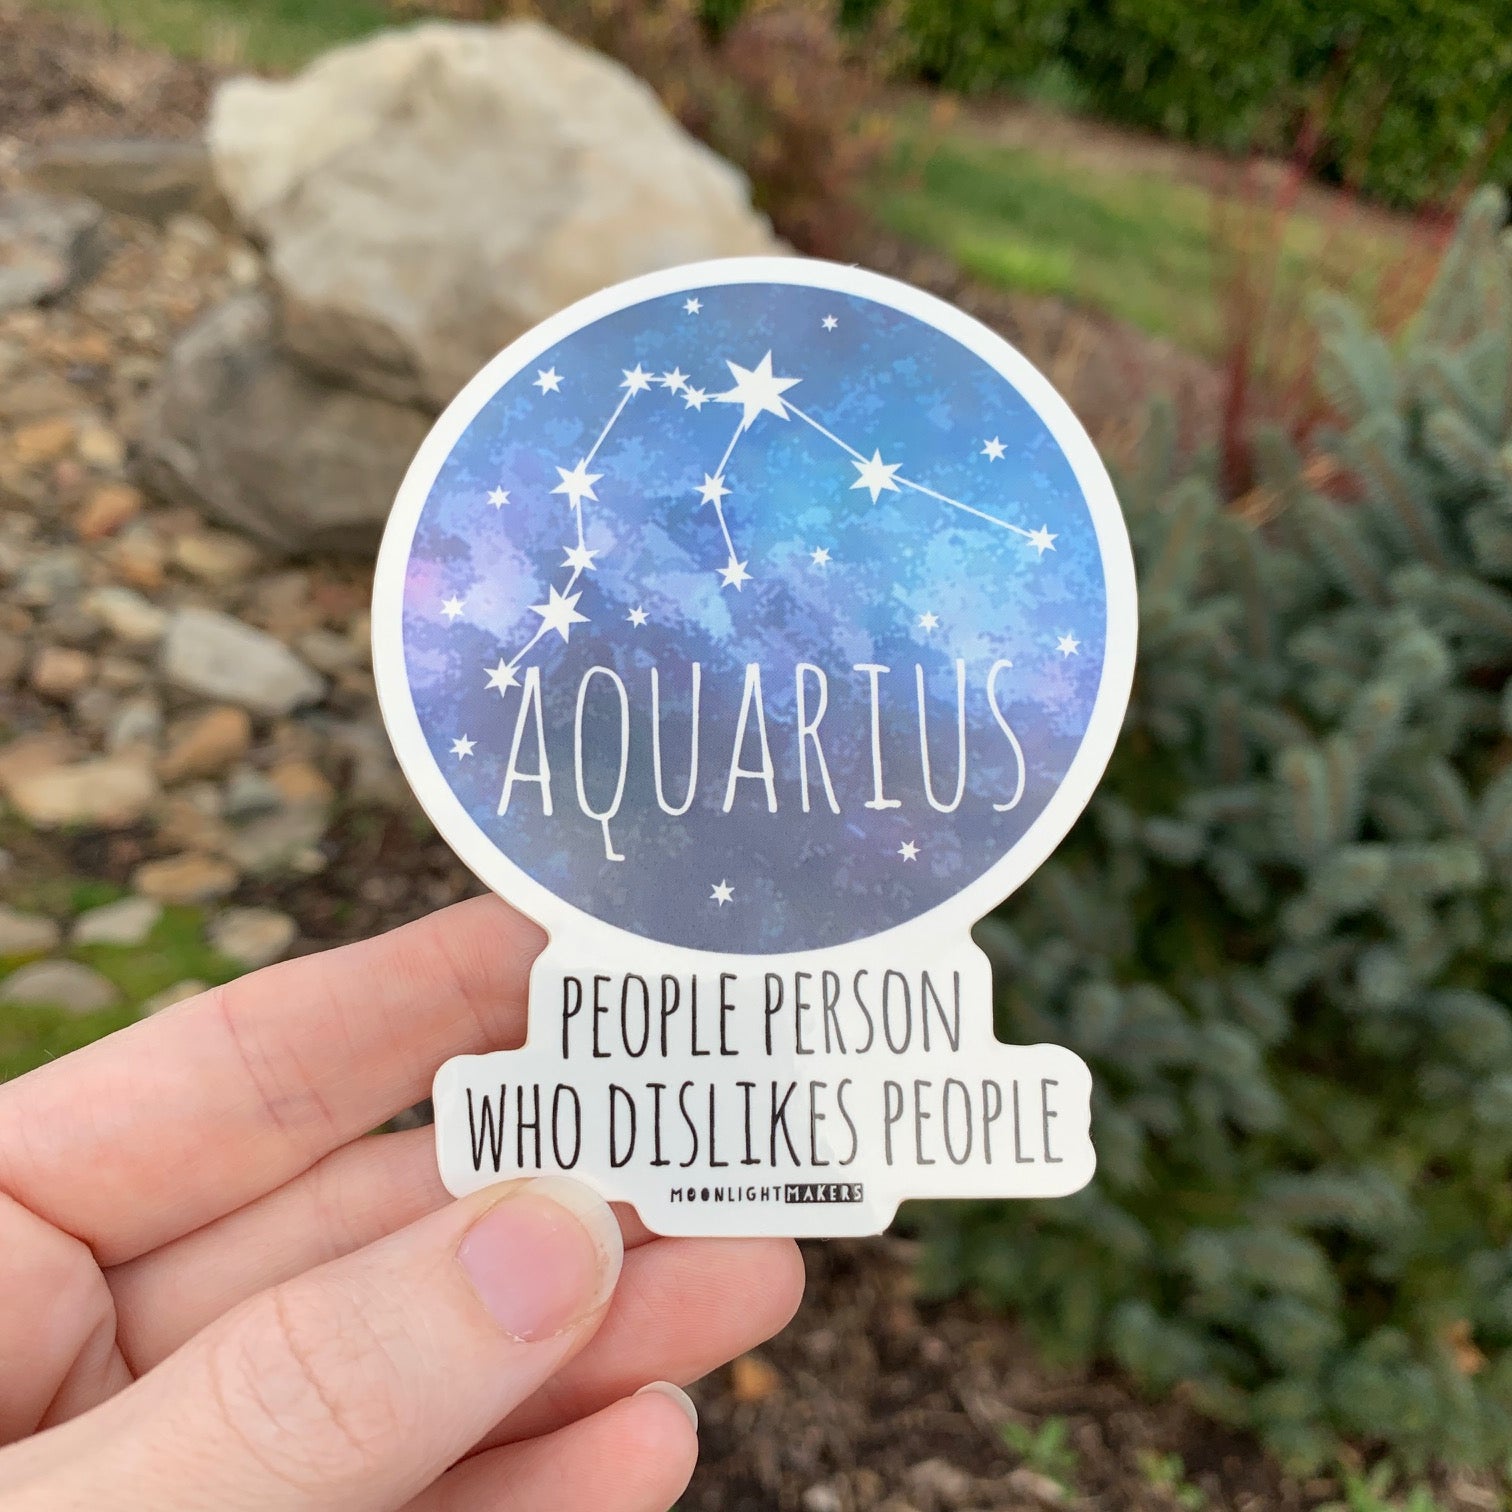 Signs of the Zodiac/ Star Sign - Die Cut Sticker - MoonlightMakers